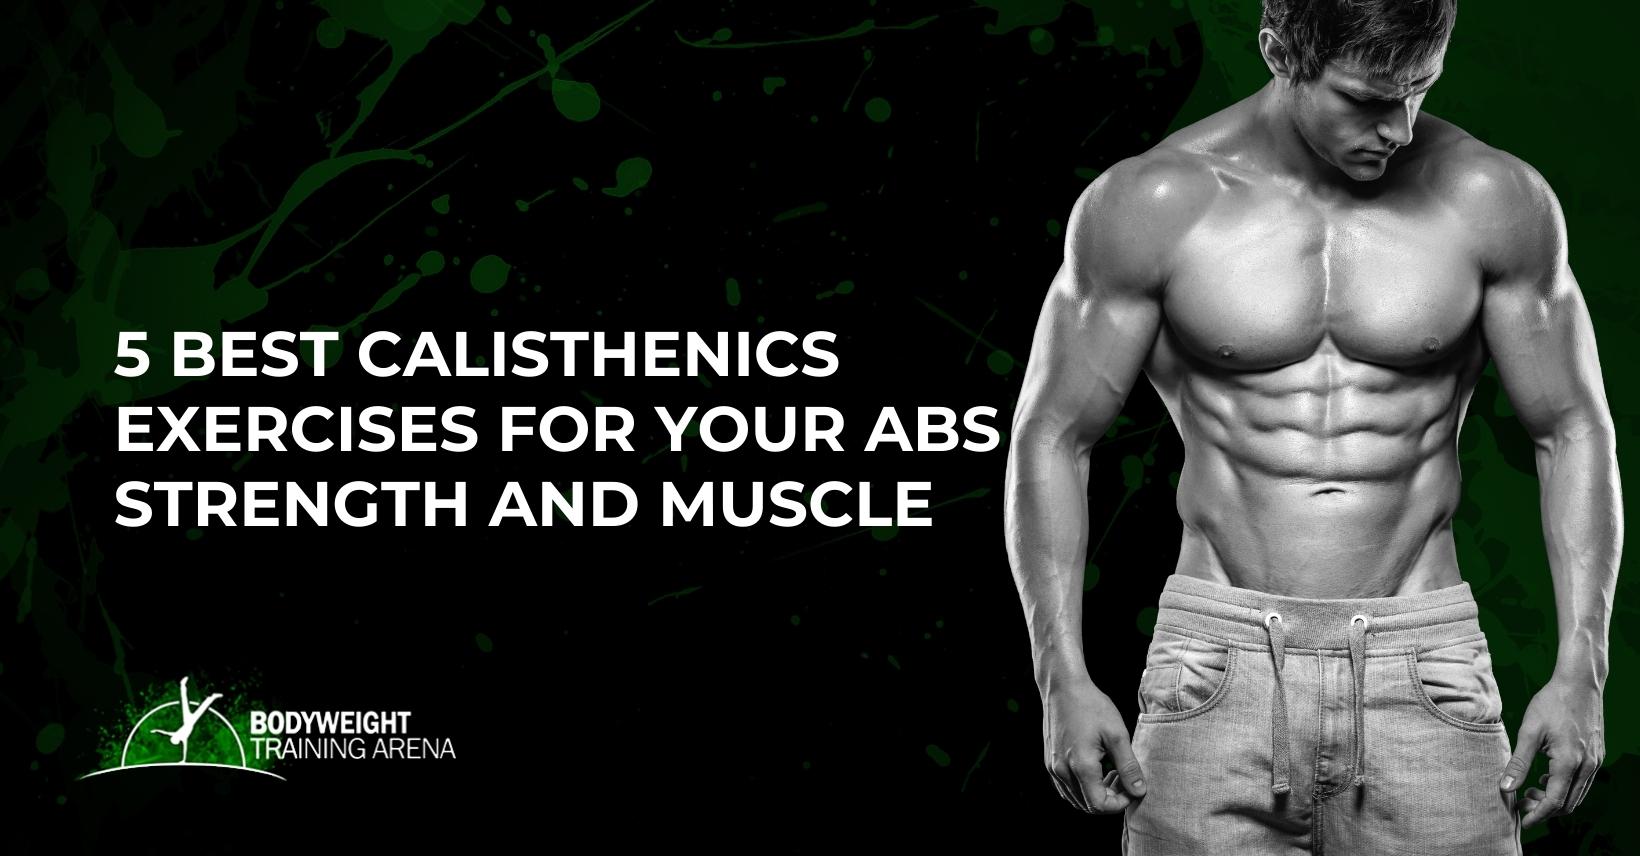 5 Best Calisthenics Exercises for Your Abs Strength and Muscle